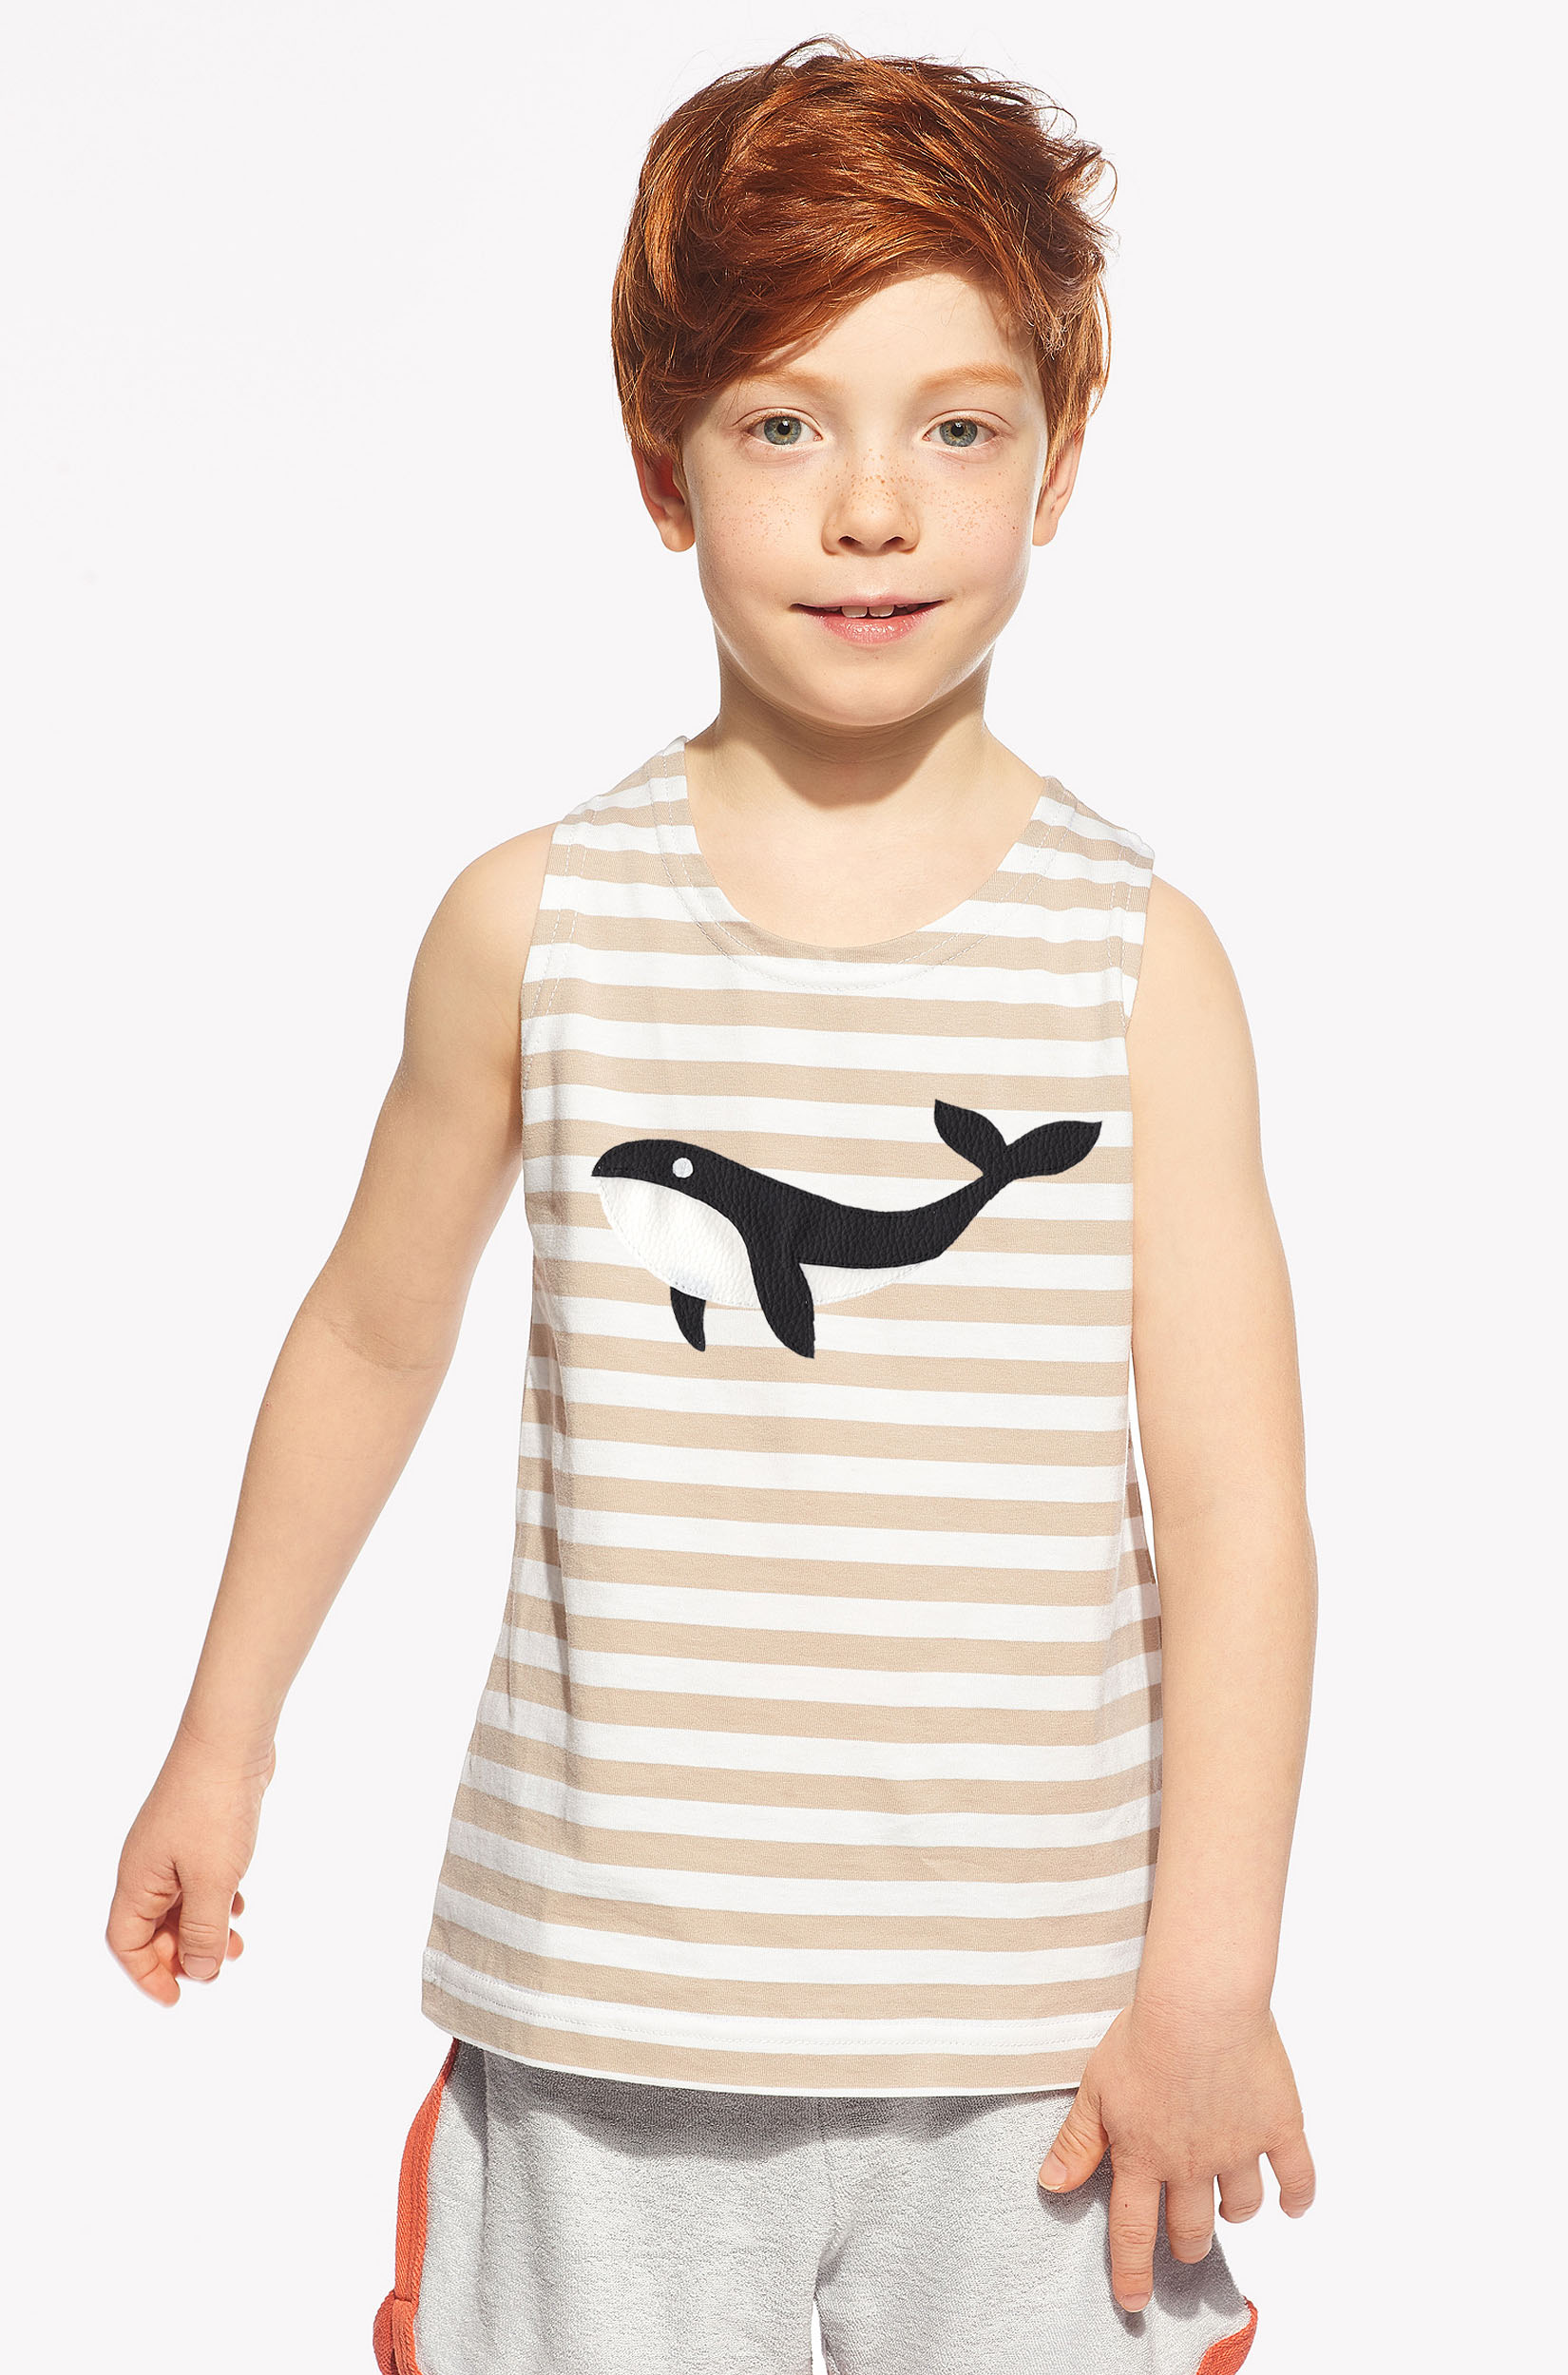 Singlet with whale